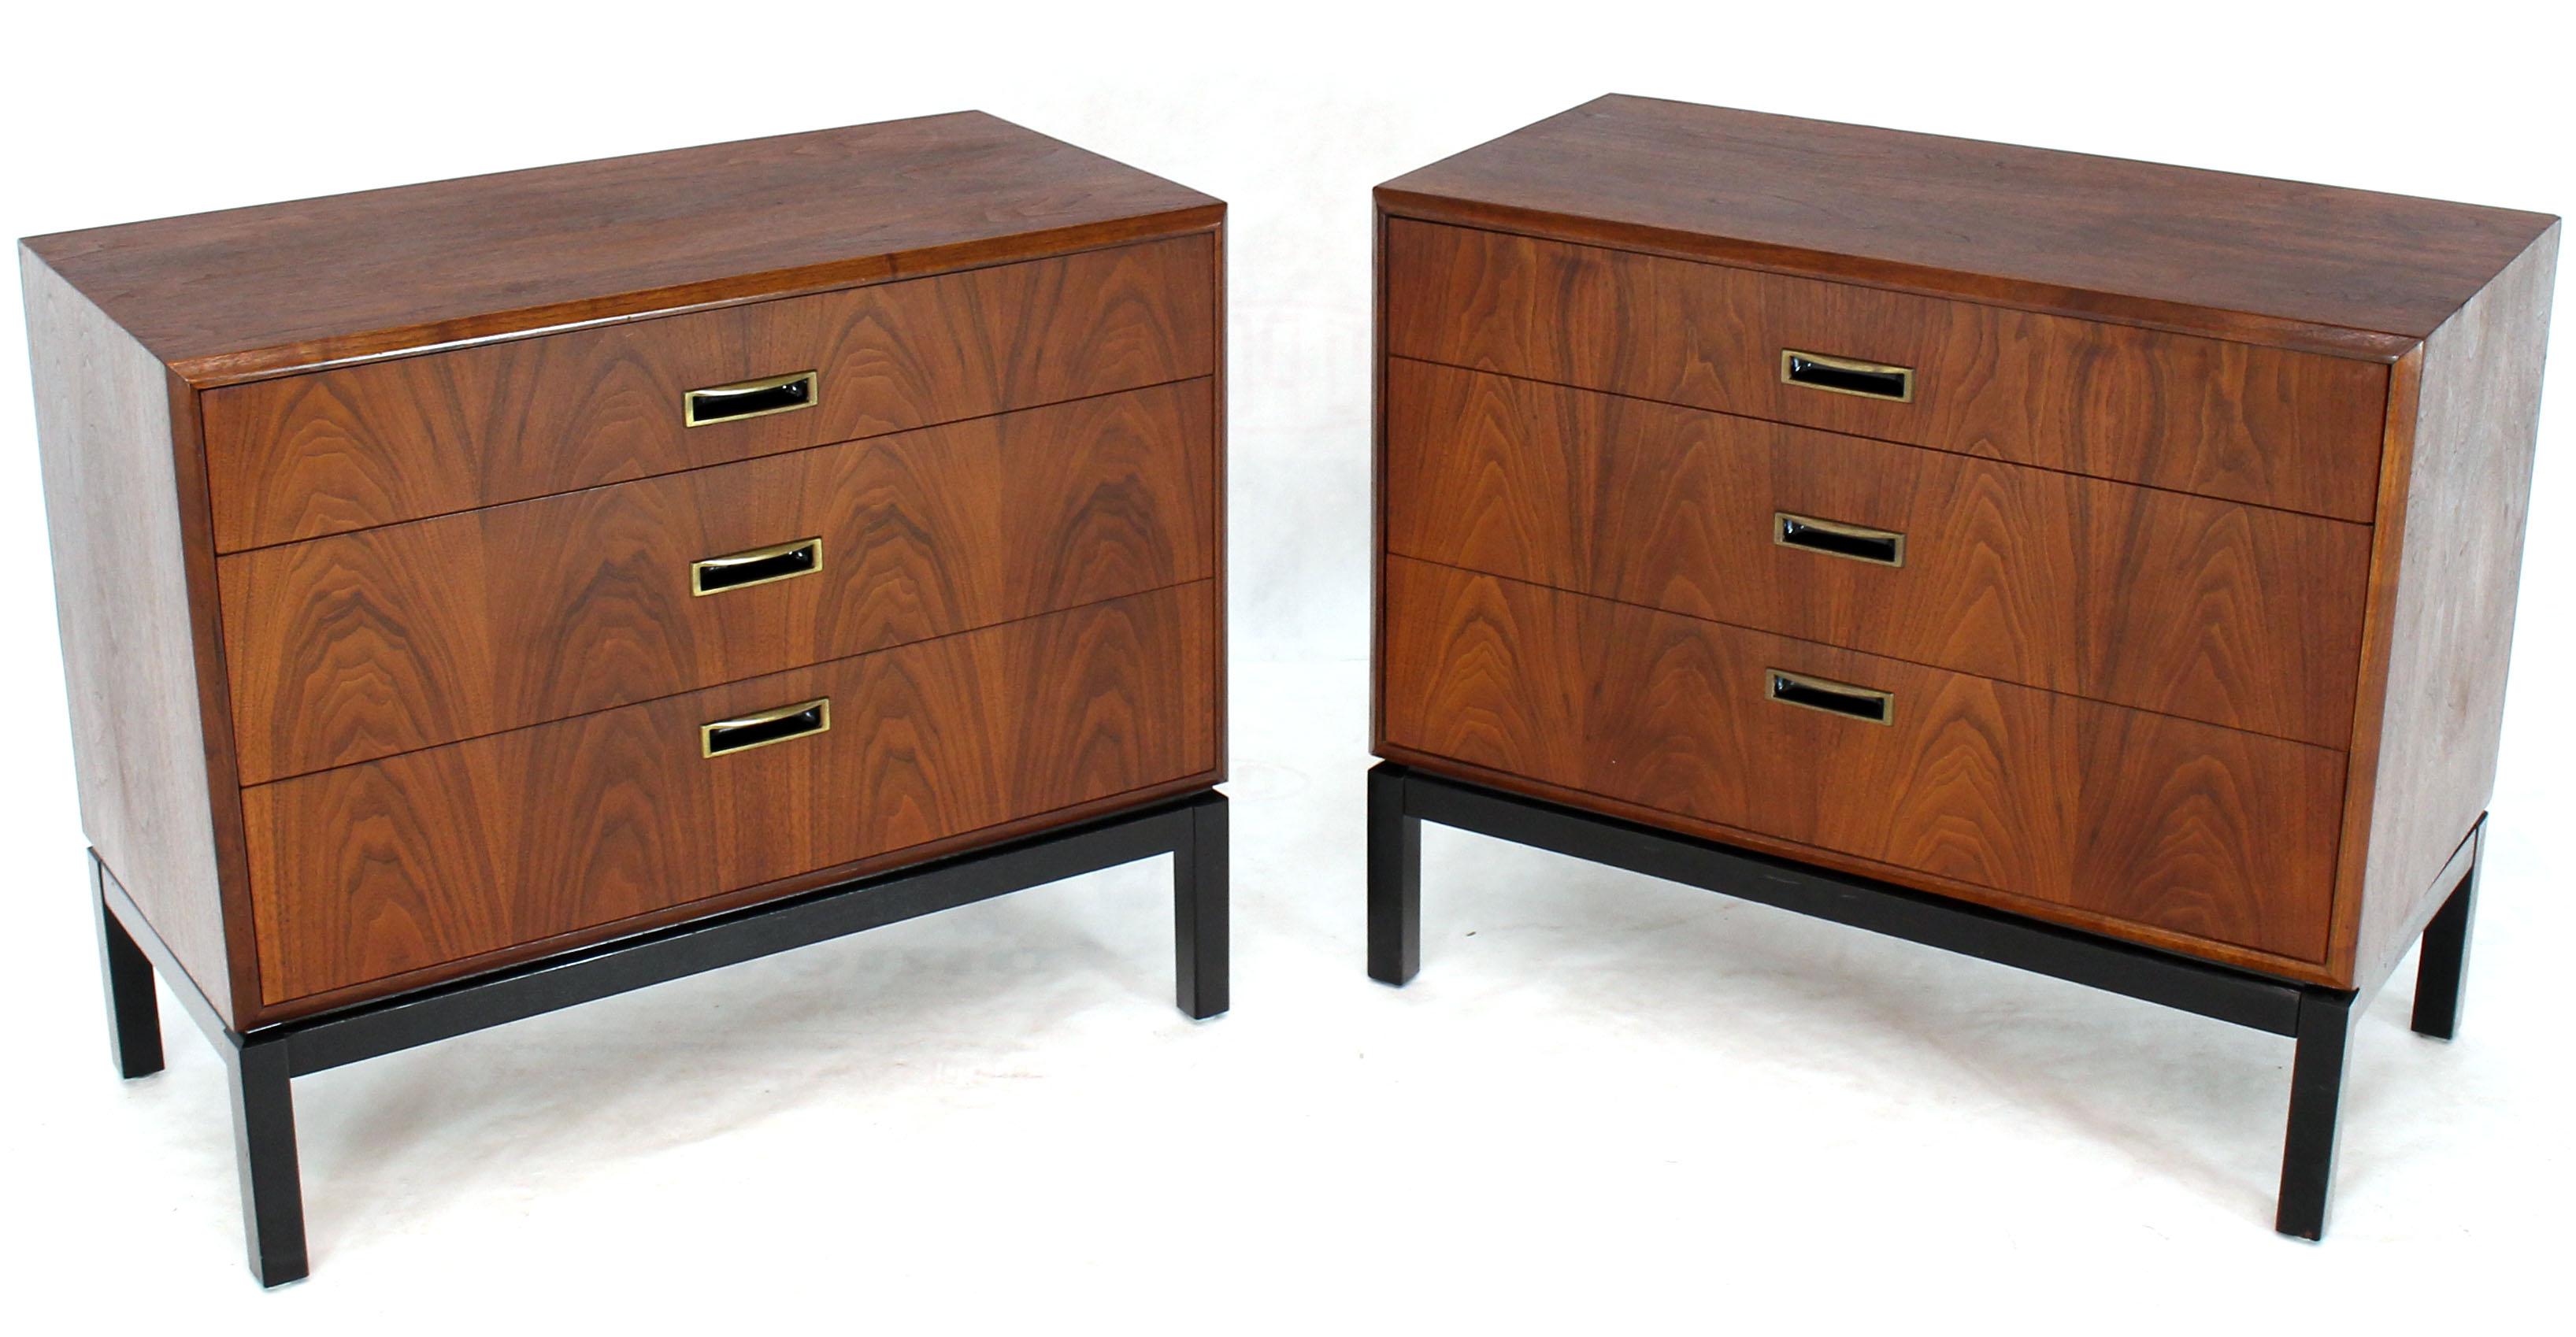 Pair of Mid-Century Modern walnut bachelor chests dresser. Black lacquer bases oiled walnut and brass pulls Milo Baughman looking design. Will work well with Risom and Knoll decor.